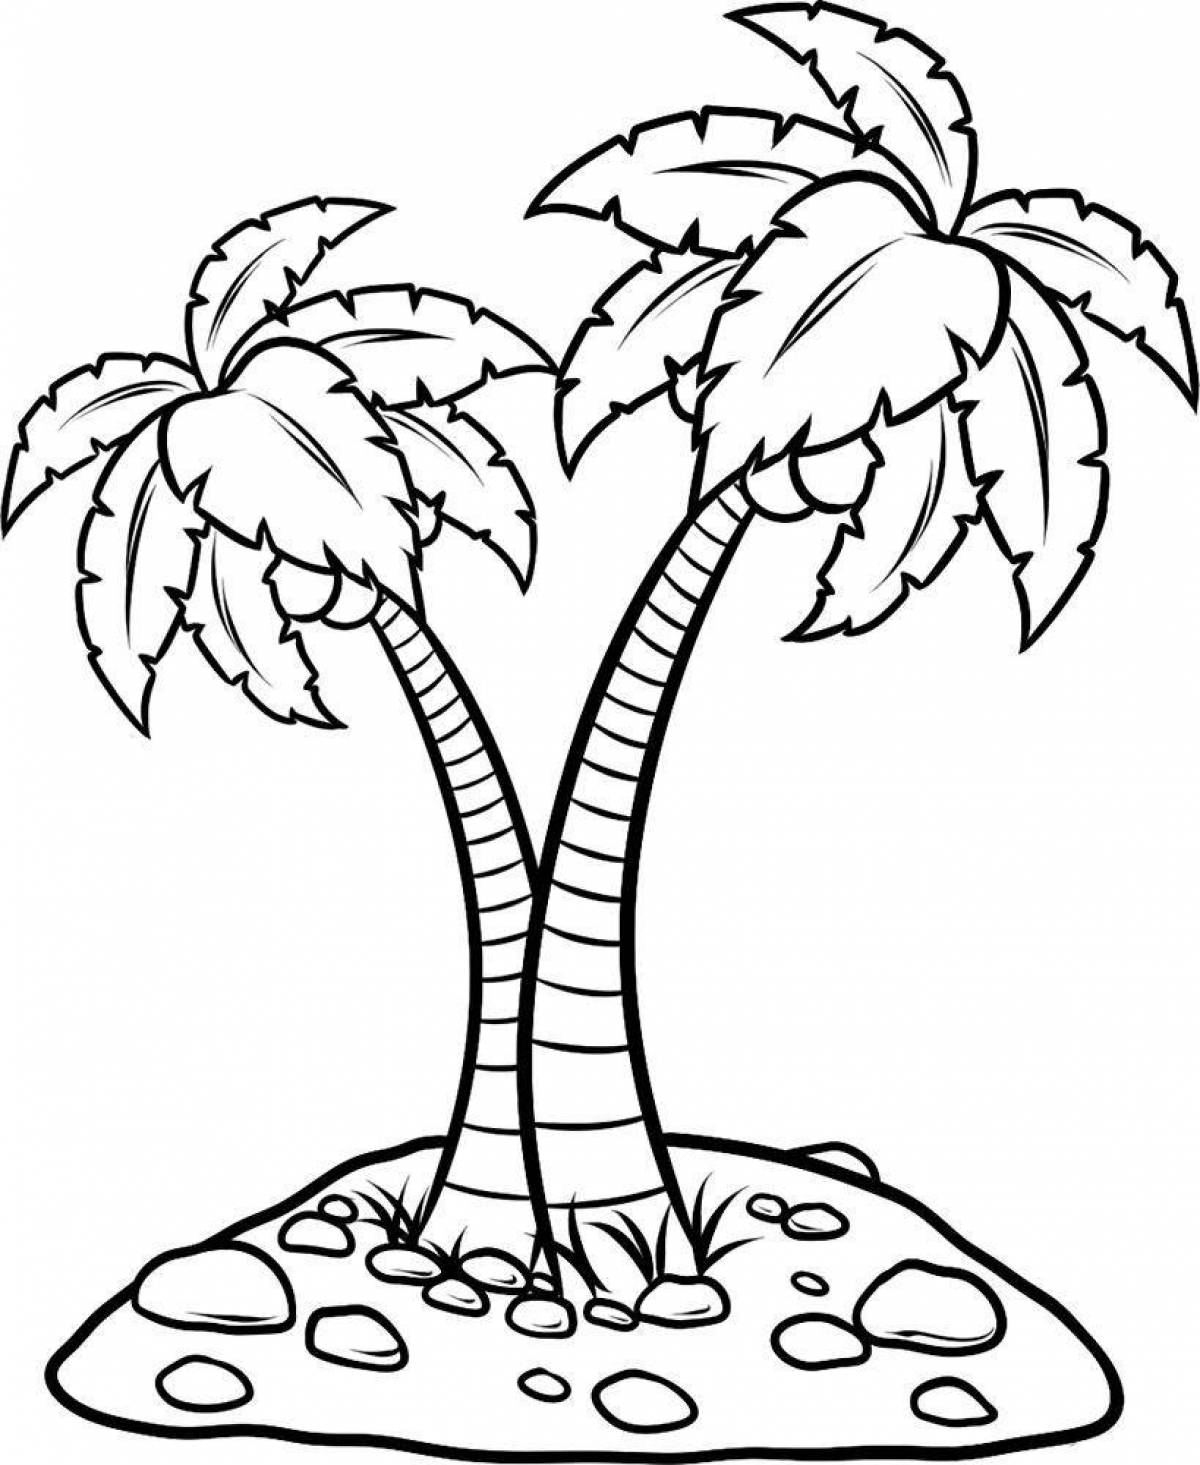 Coloring modern palm tree for kids